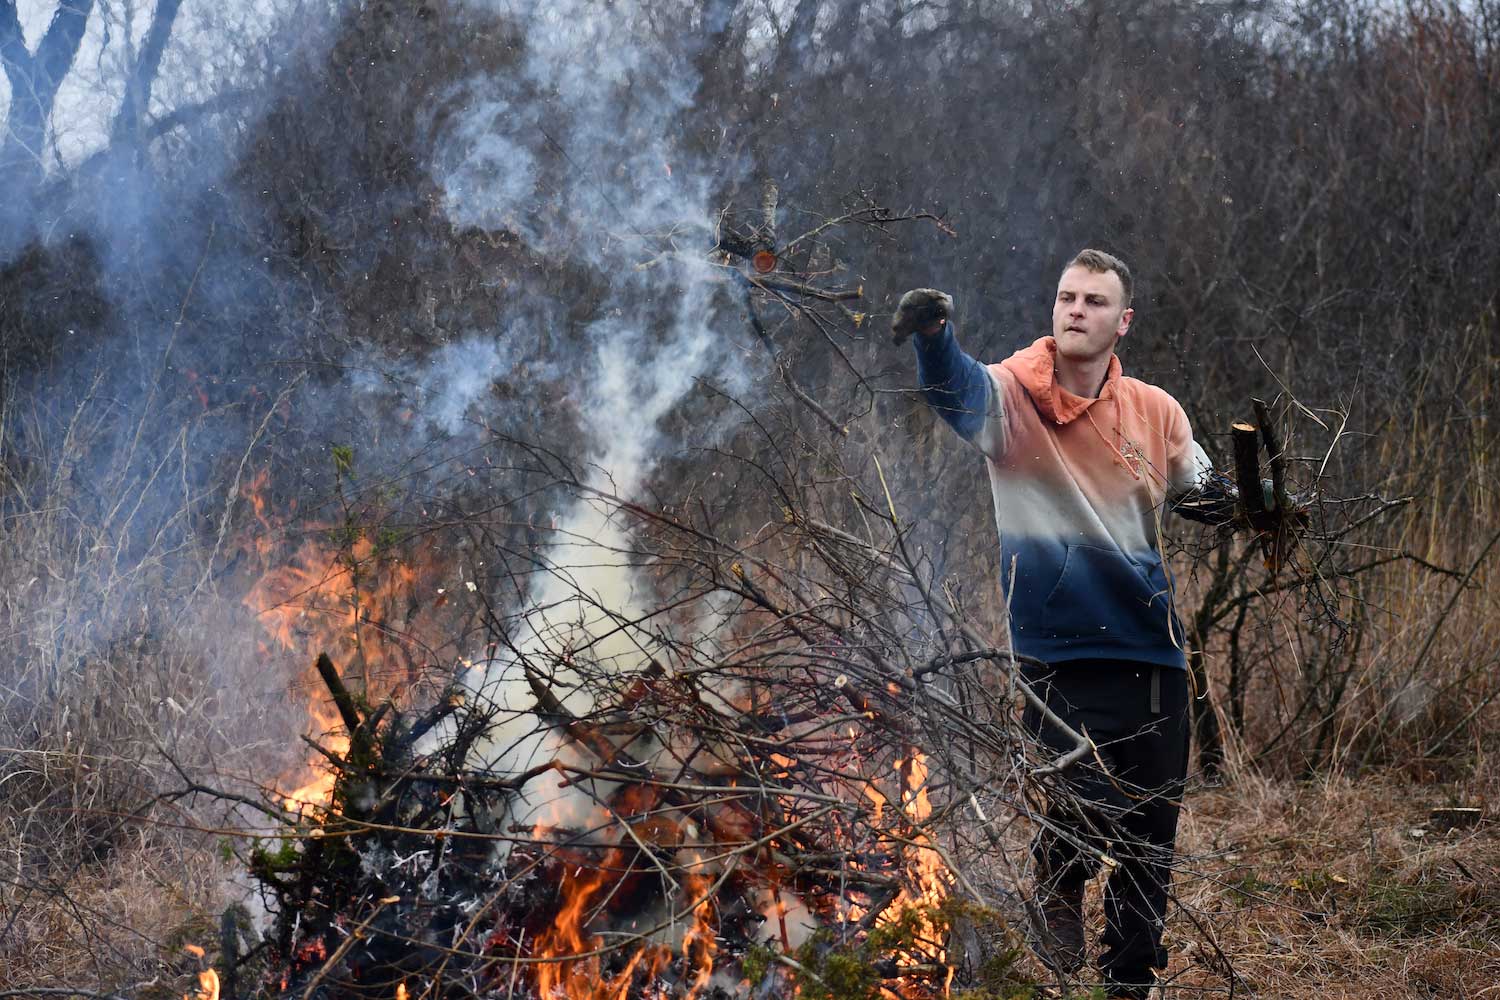 A young man adding branches to a burning brush pile.